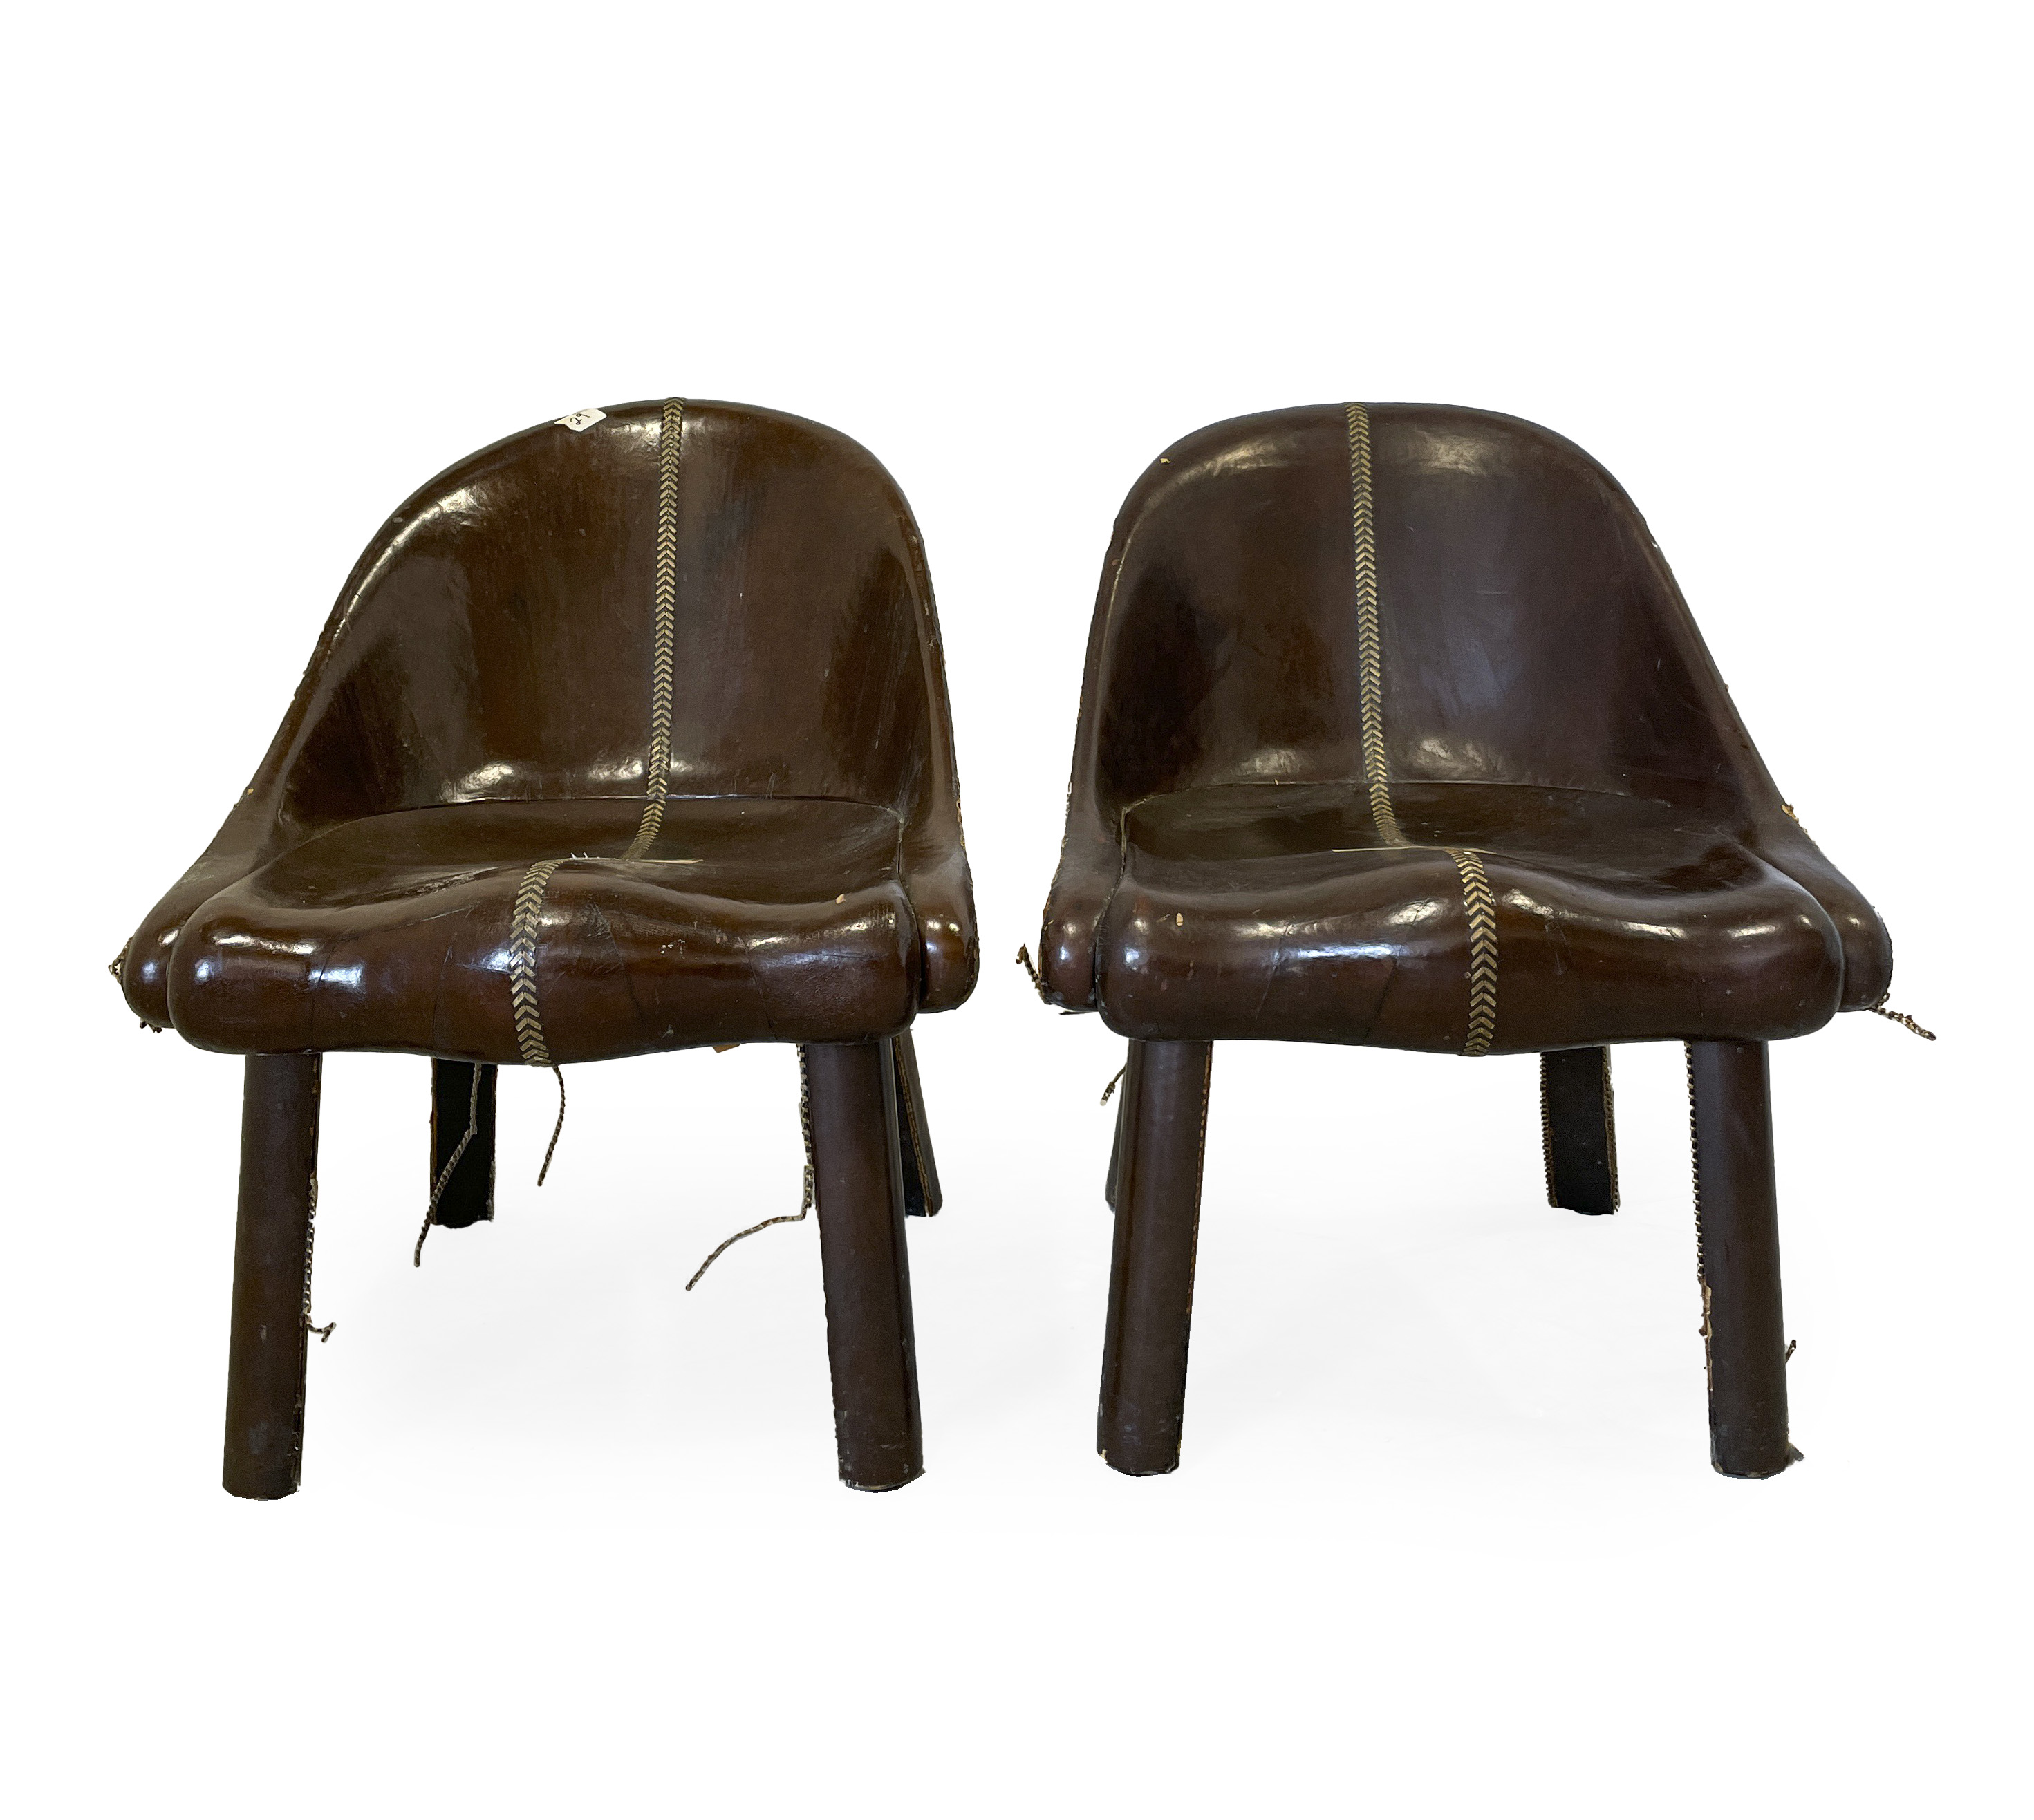 William ‘Billy’ Haines, two chairs from the Desert Living Room at the Golden Gate International Exposition of 1939, est. $4,000-$6,000